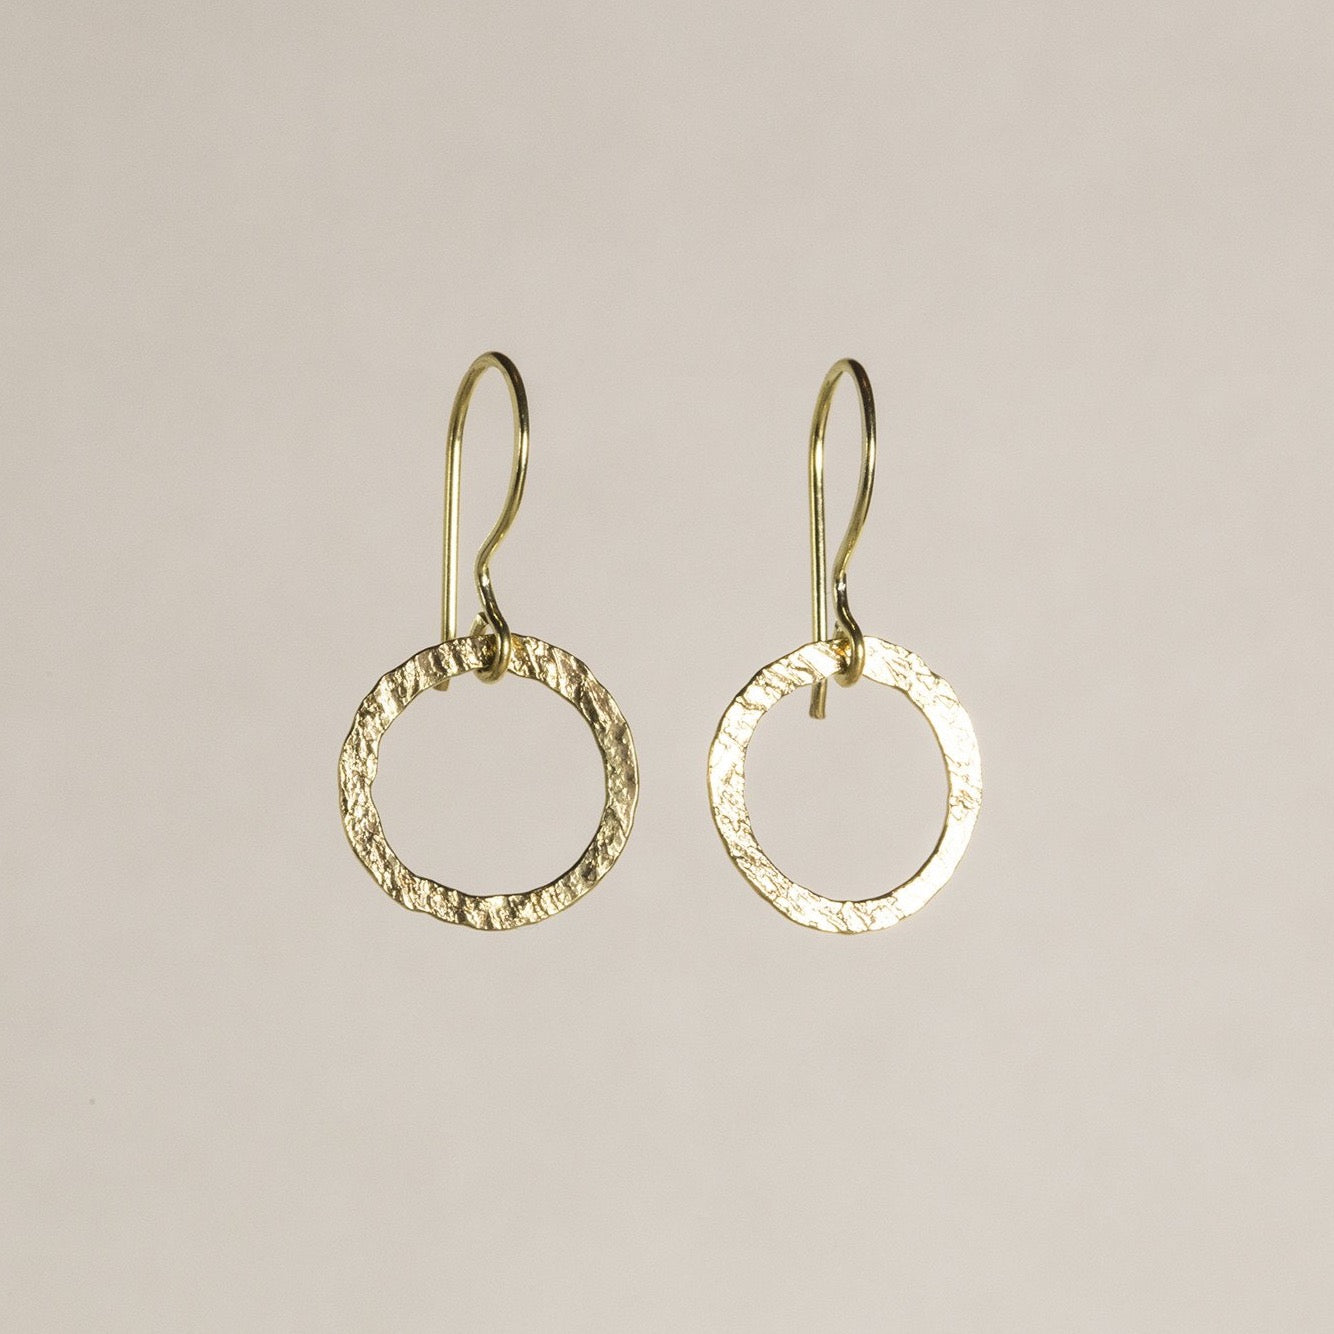 an entwined hoop earrings made of textured gold plated silver